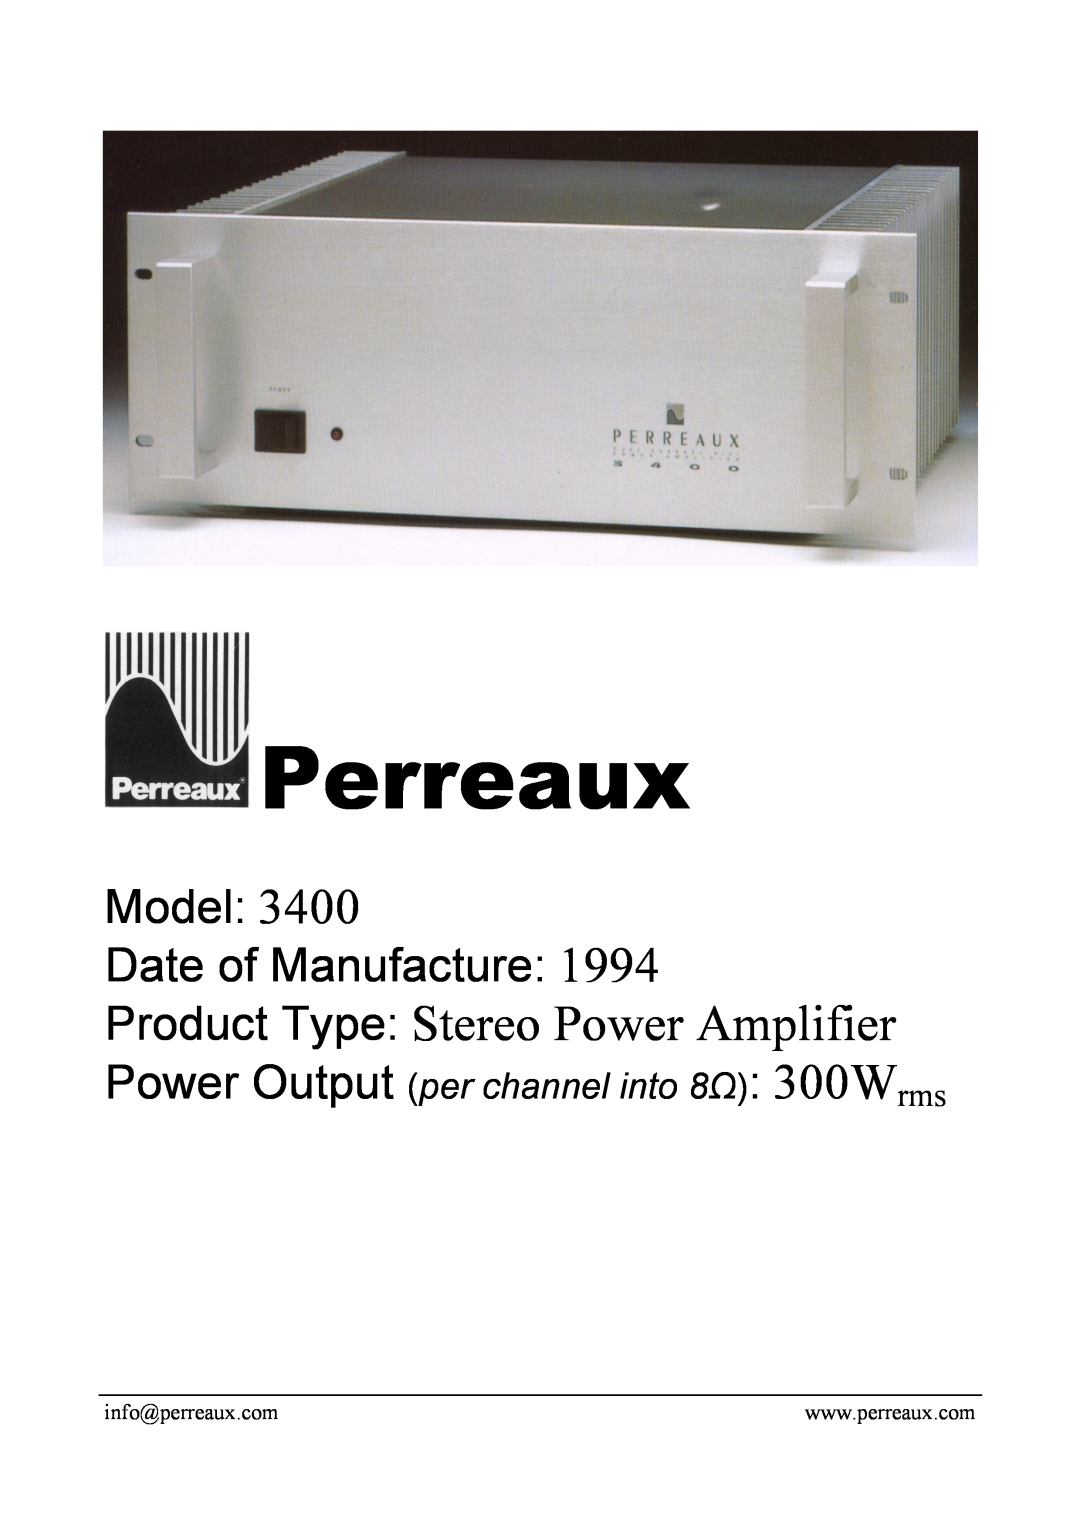 Perreaux 3400 manual Perreaux, Product Type Stereo Power Amplifier, Model Date of Manufacture 